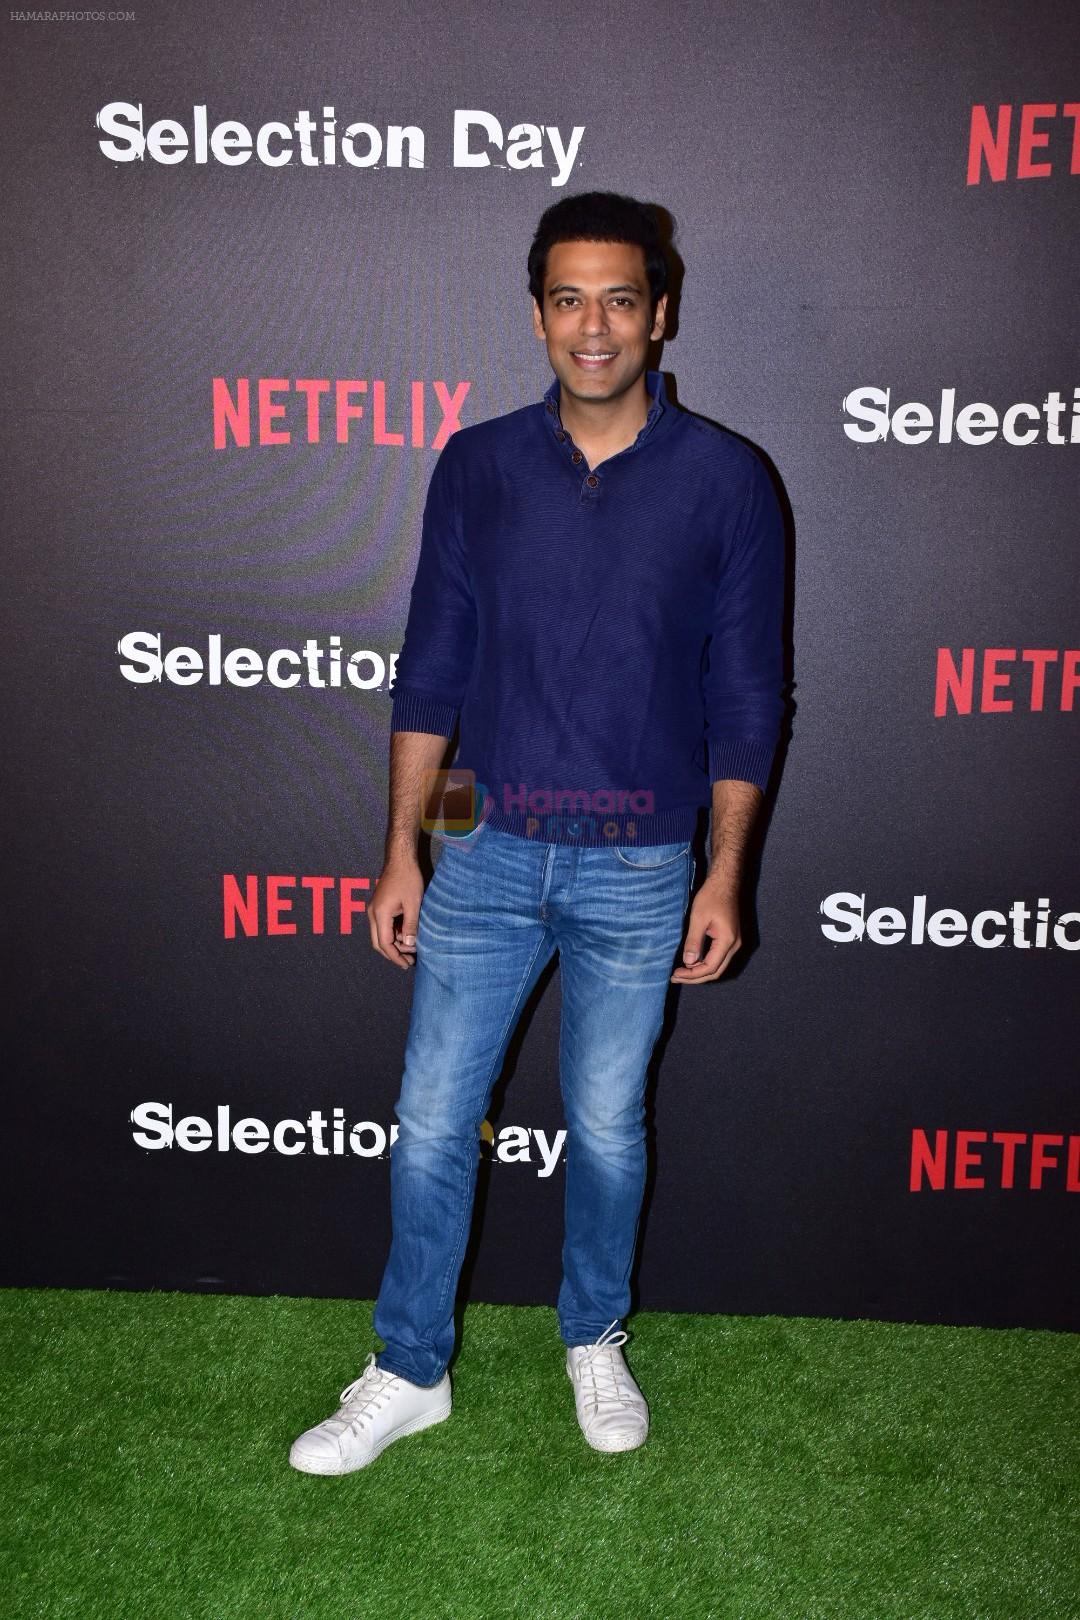 samir kochhar at the Red Carpet of Netfix Upcoming Series Selection Day on 18th Dec 2018